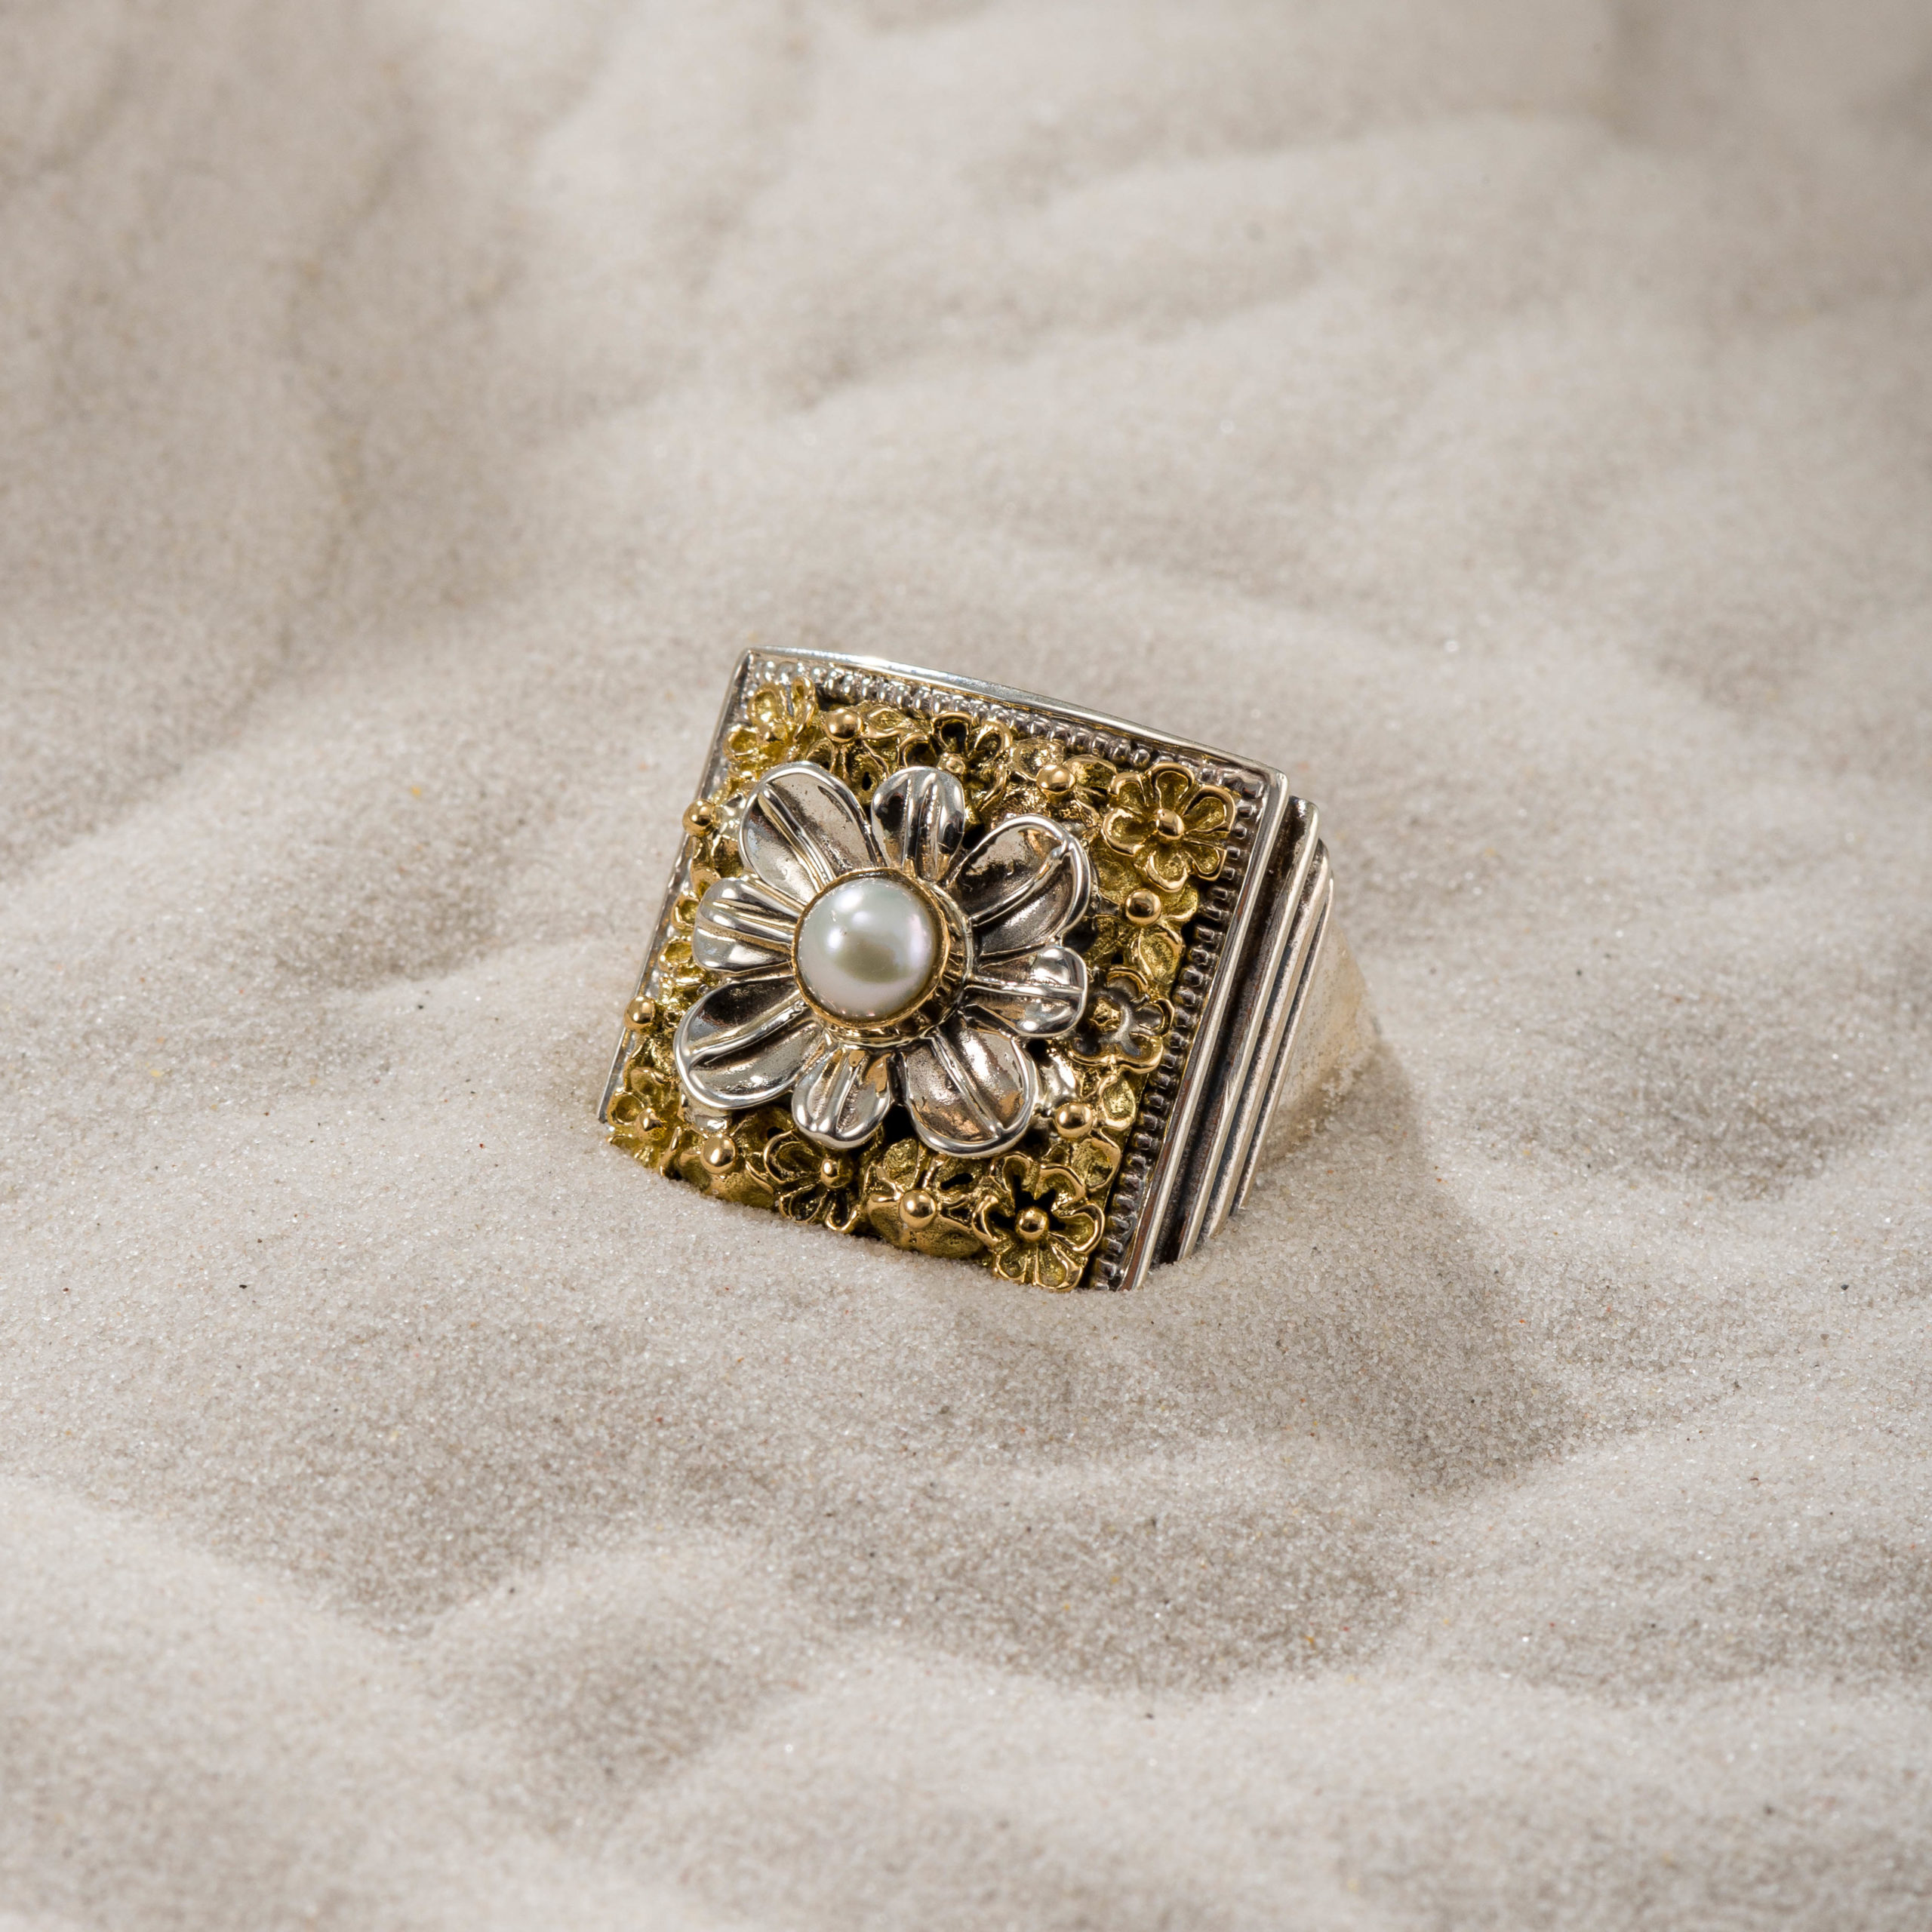 Athenian Flower Ring in 18K Gold and Sterling Silver with freshwater pearl